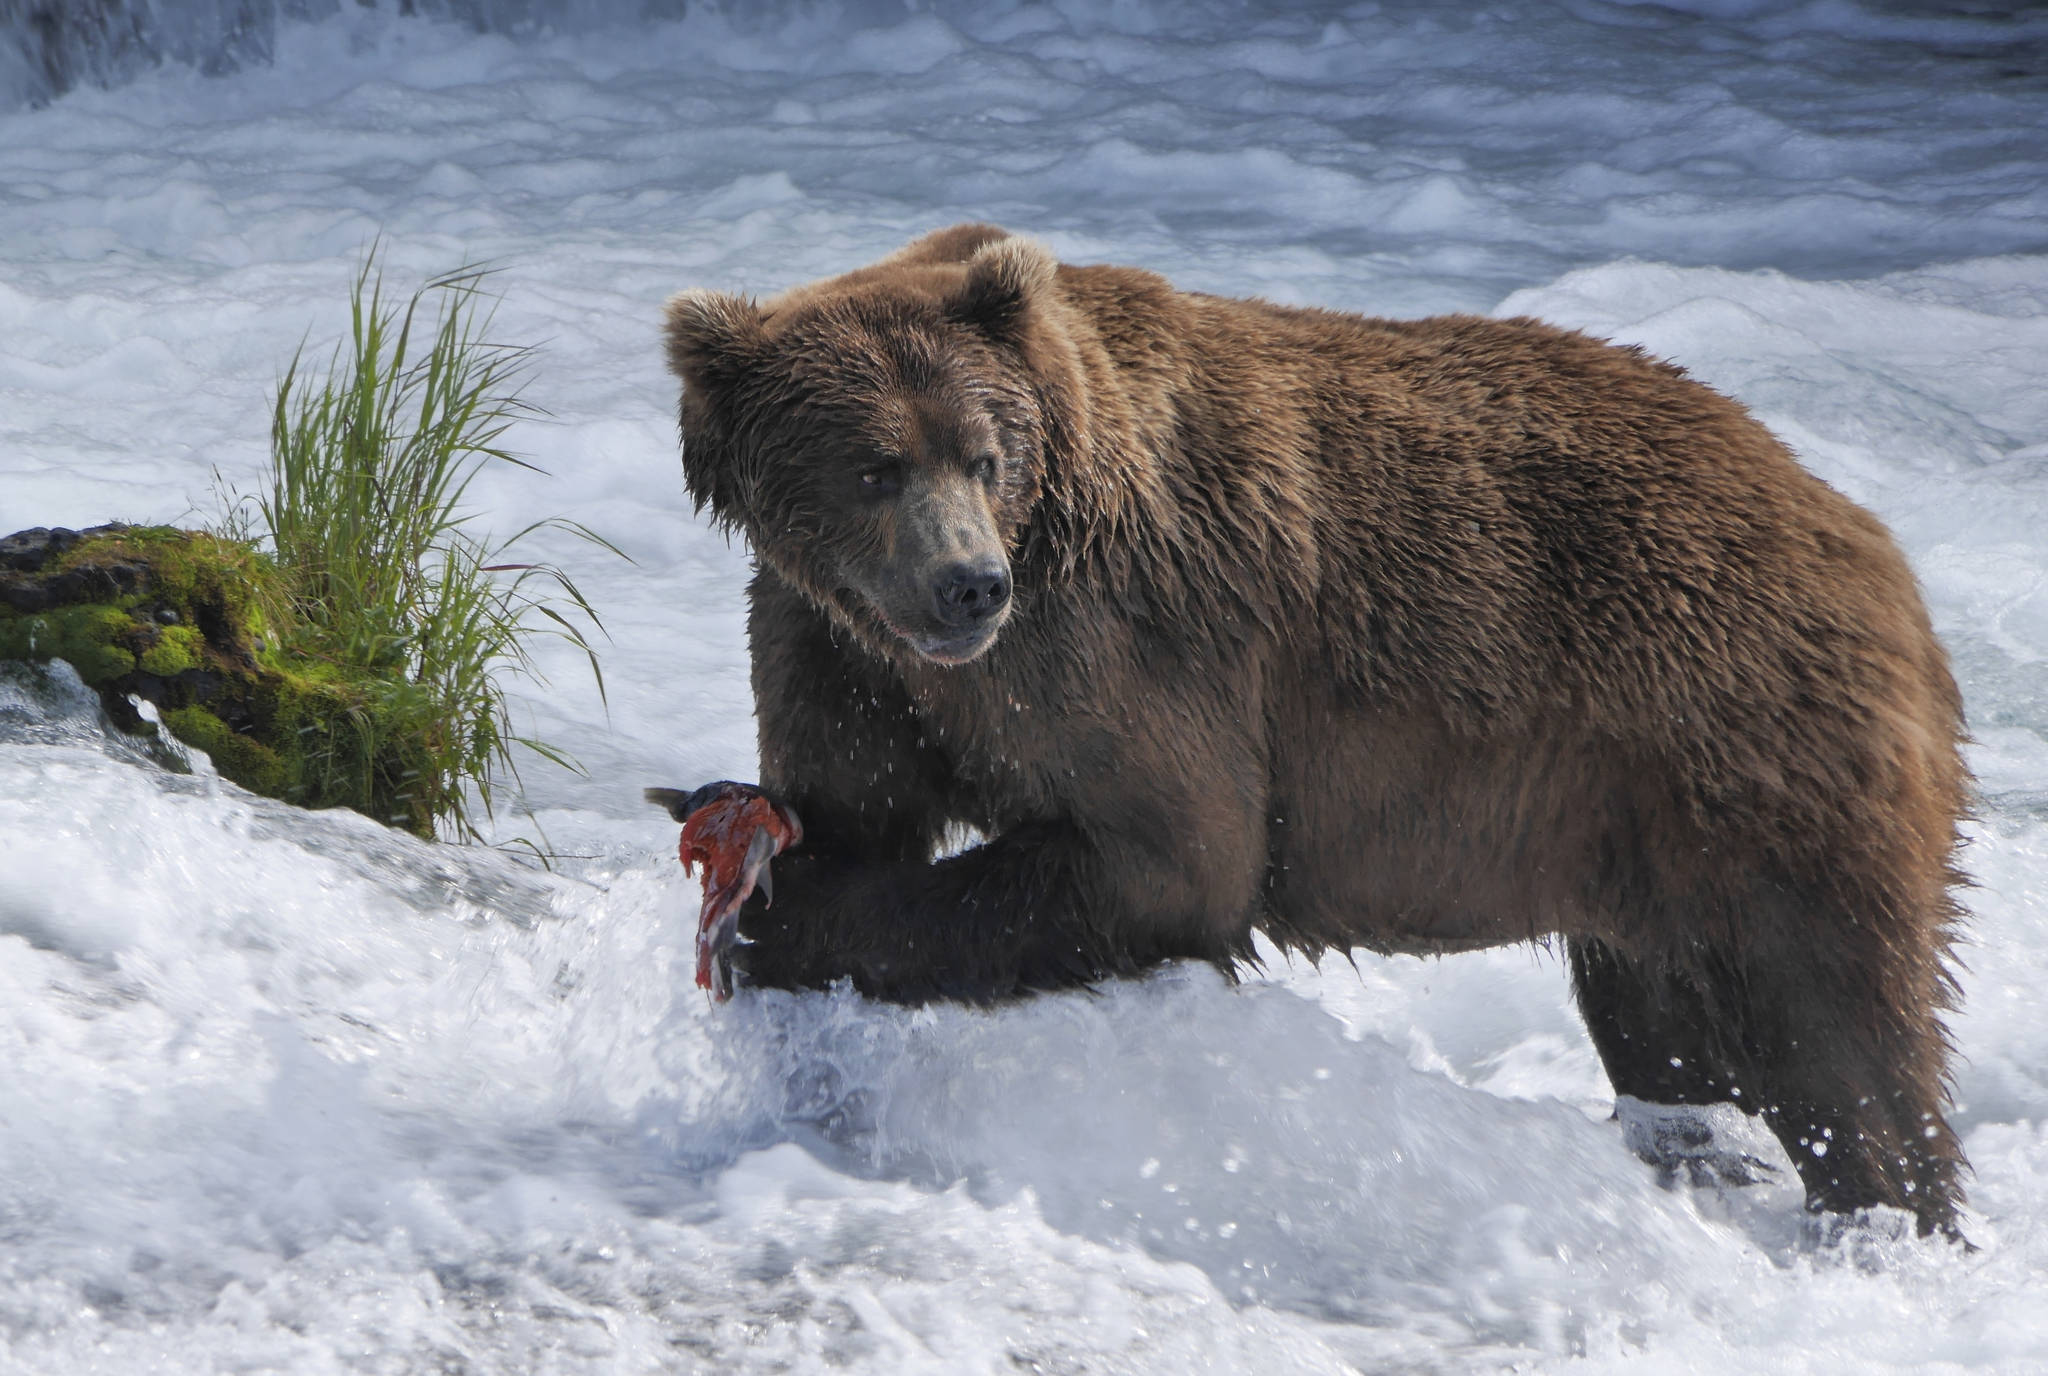 PBS airing live nature special from Alaska this summer